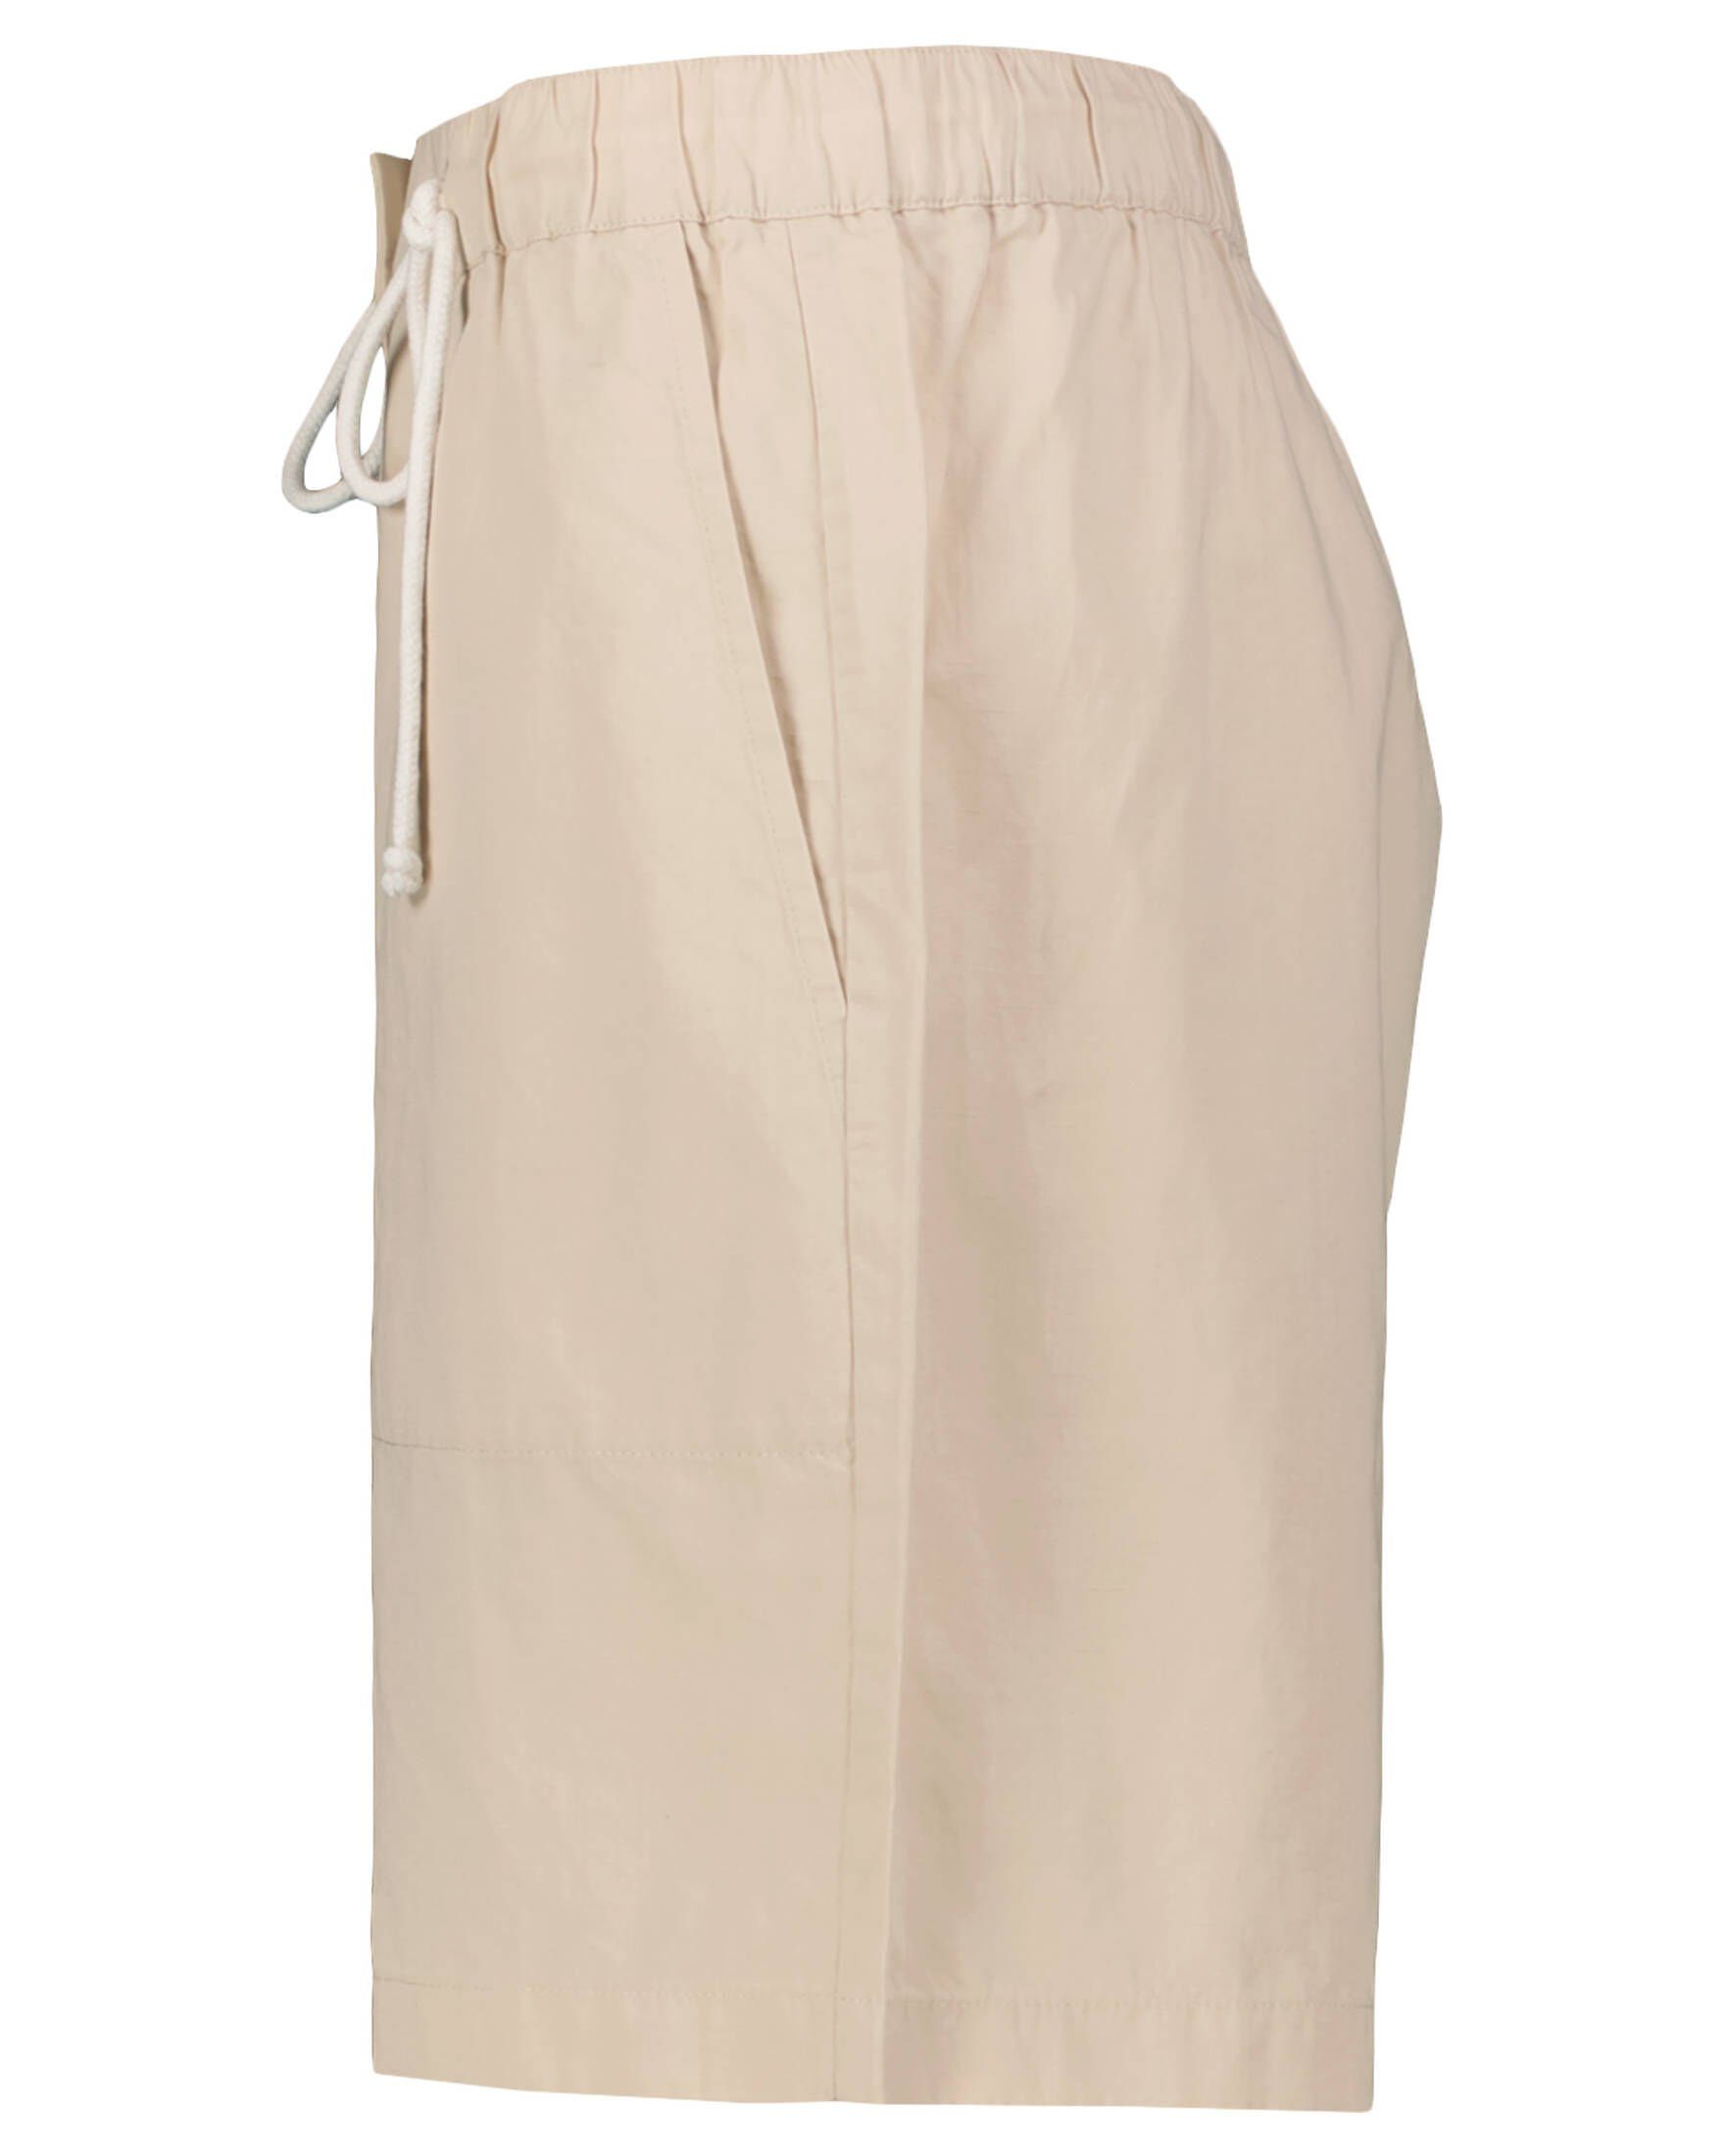 Fit (21) Relaxed Shorts Damen Marc (1-tlg) Shorts O'Polo sand